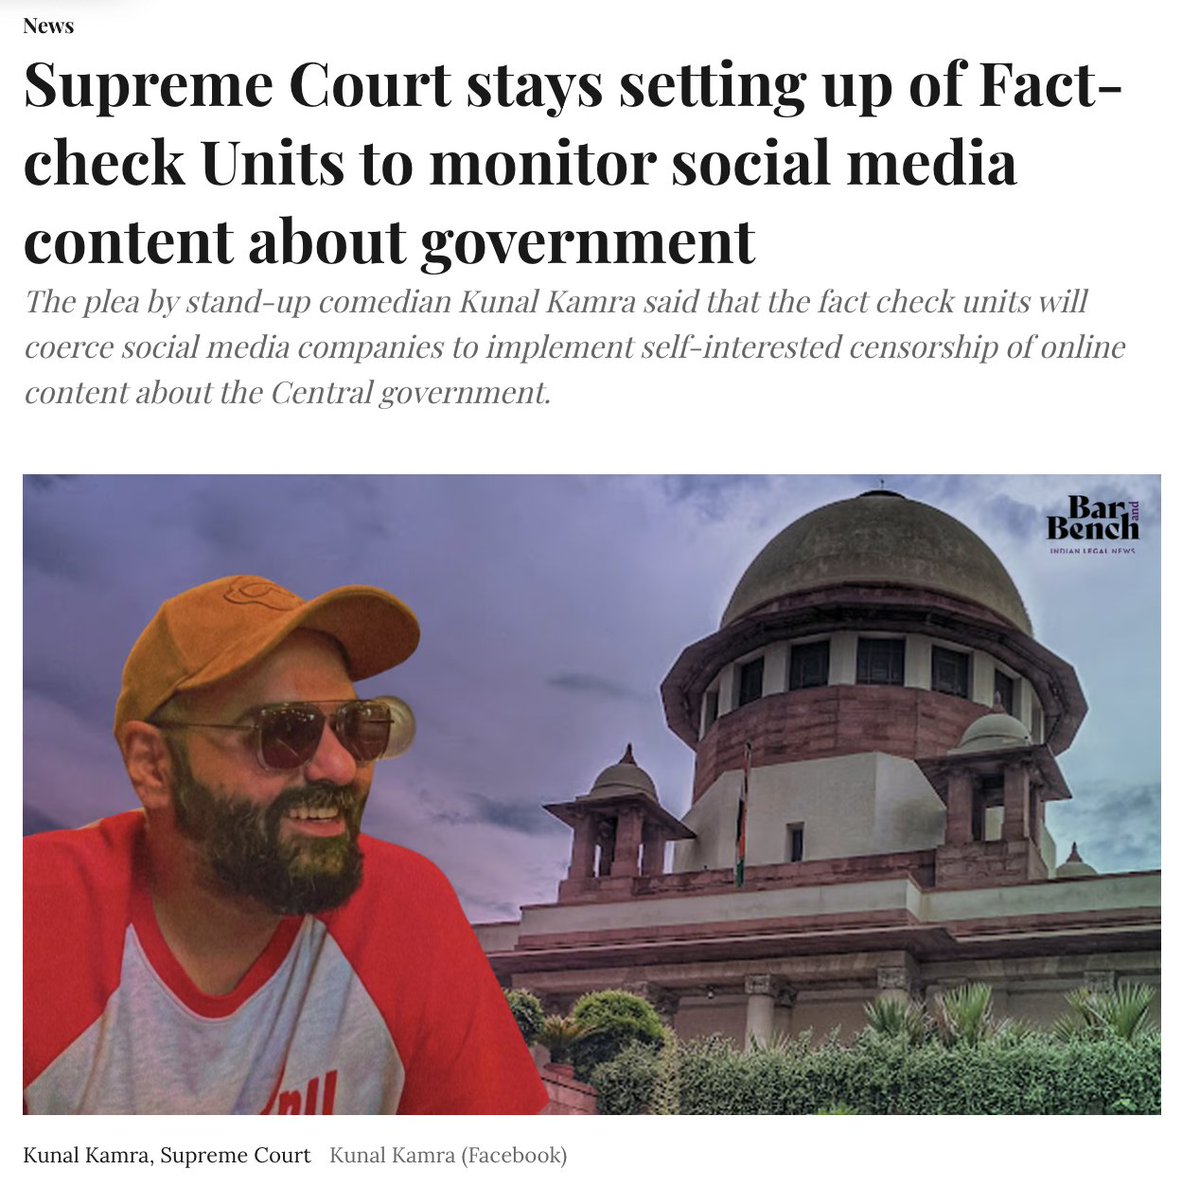 Govt of #India wants to centralize and control fact-checking. Yikes! Hooray for stand-up comic Kunal Kamra, who points out that the government should not be able to dictate whether or not something is true. #freedomofexpression #medialiteracy #india Thx @DebayonRoy